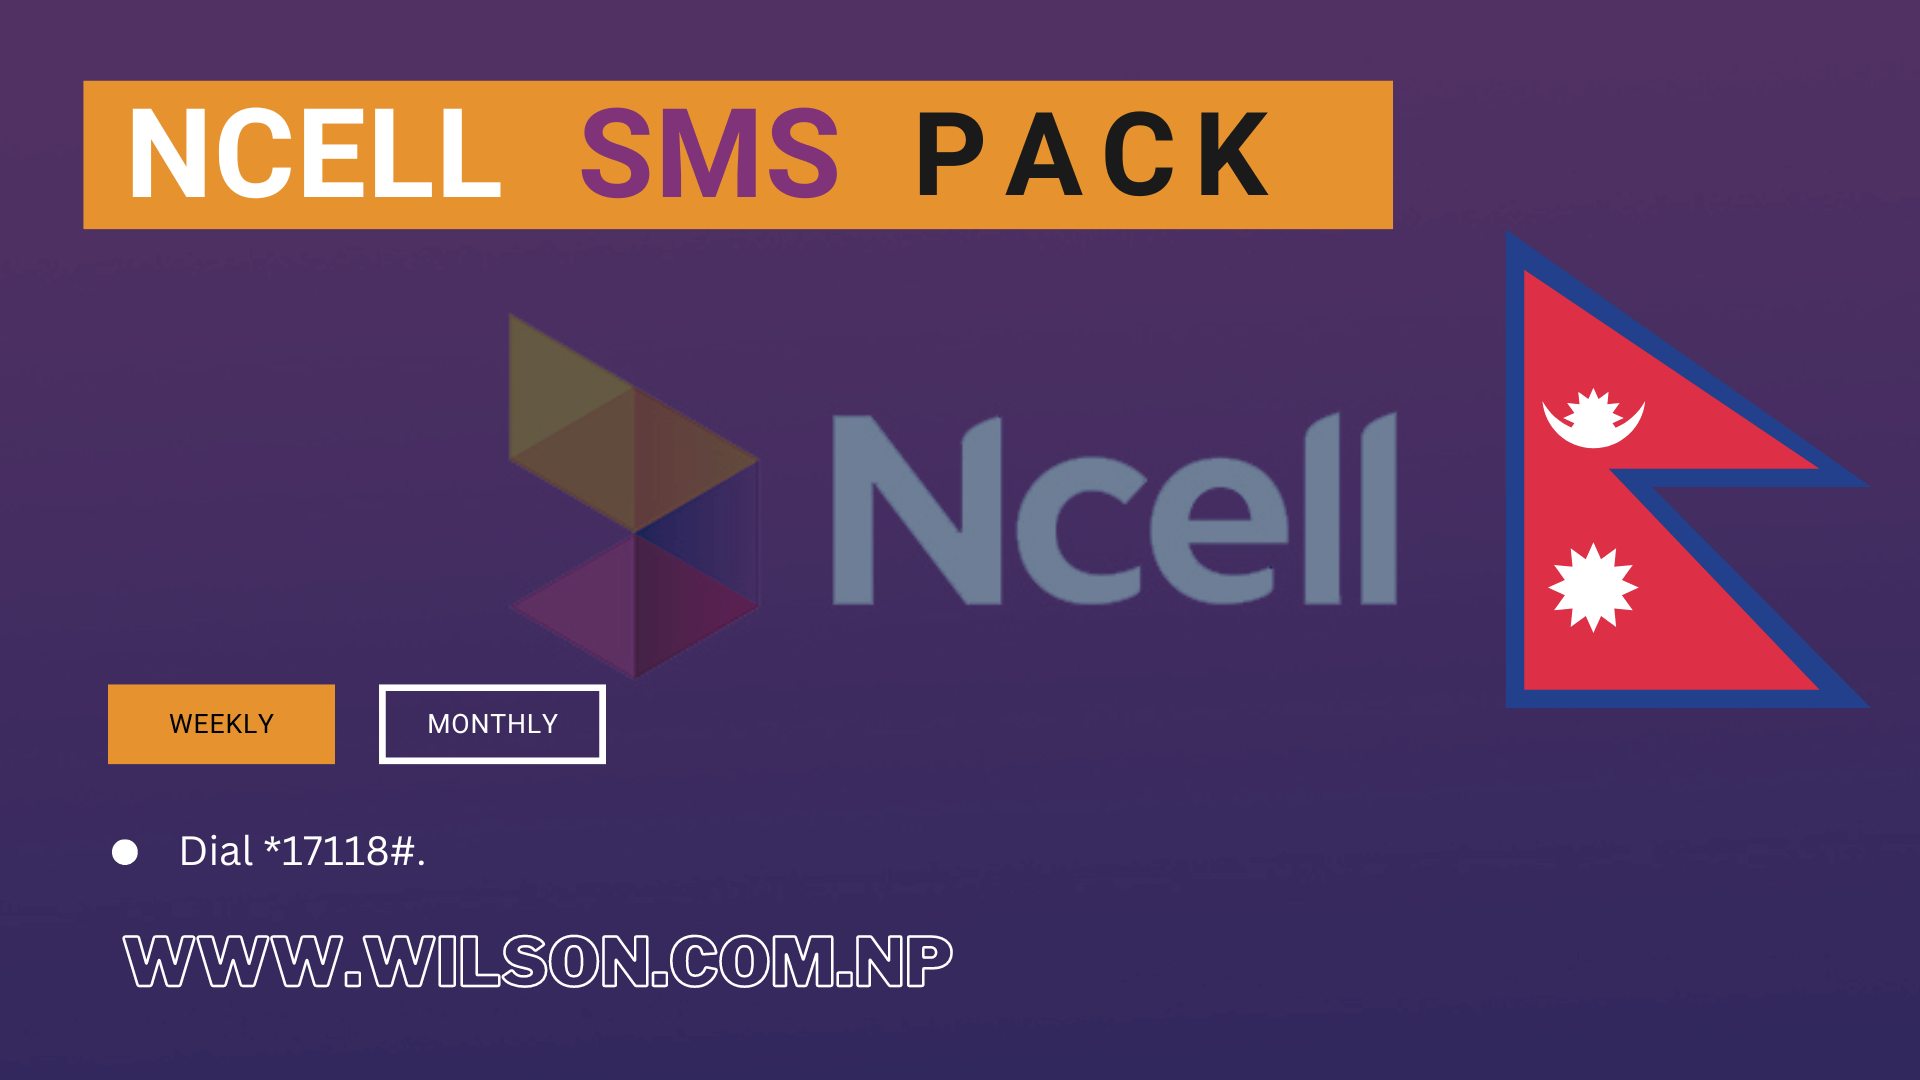 Ncell SMS PACK list